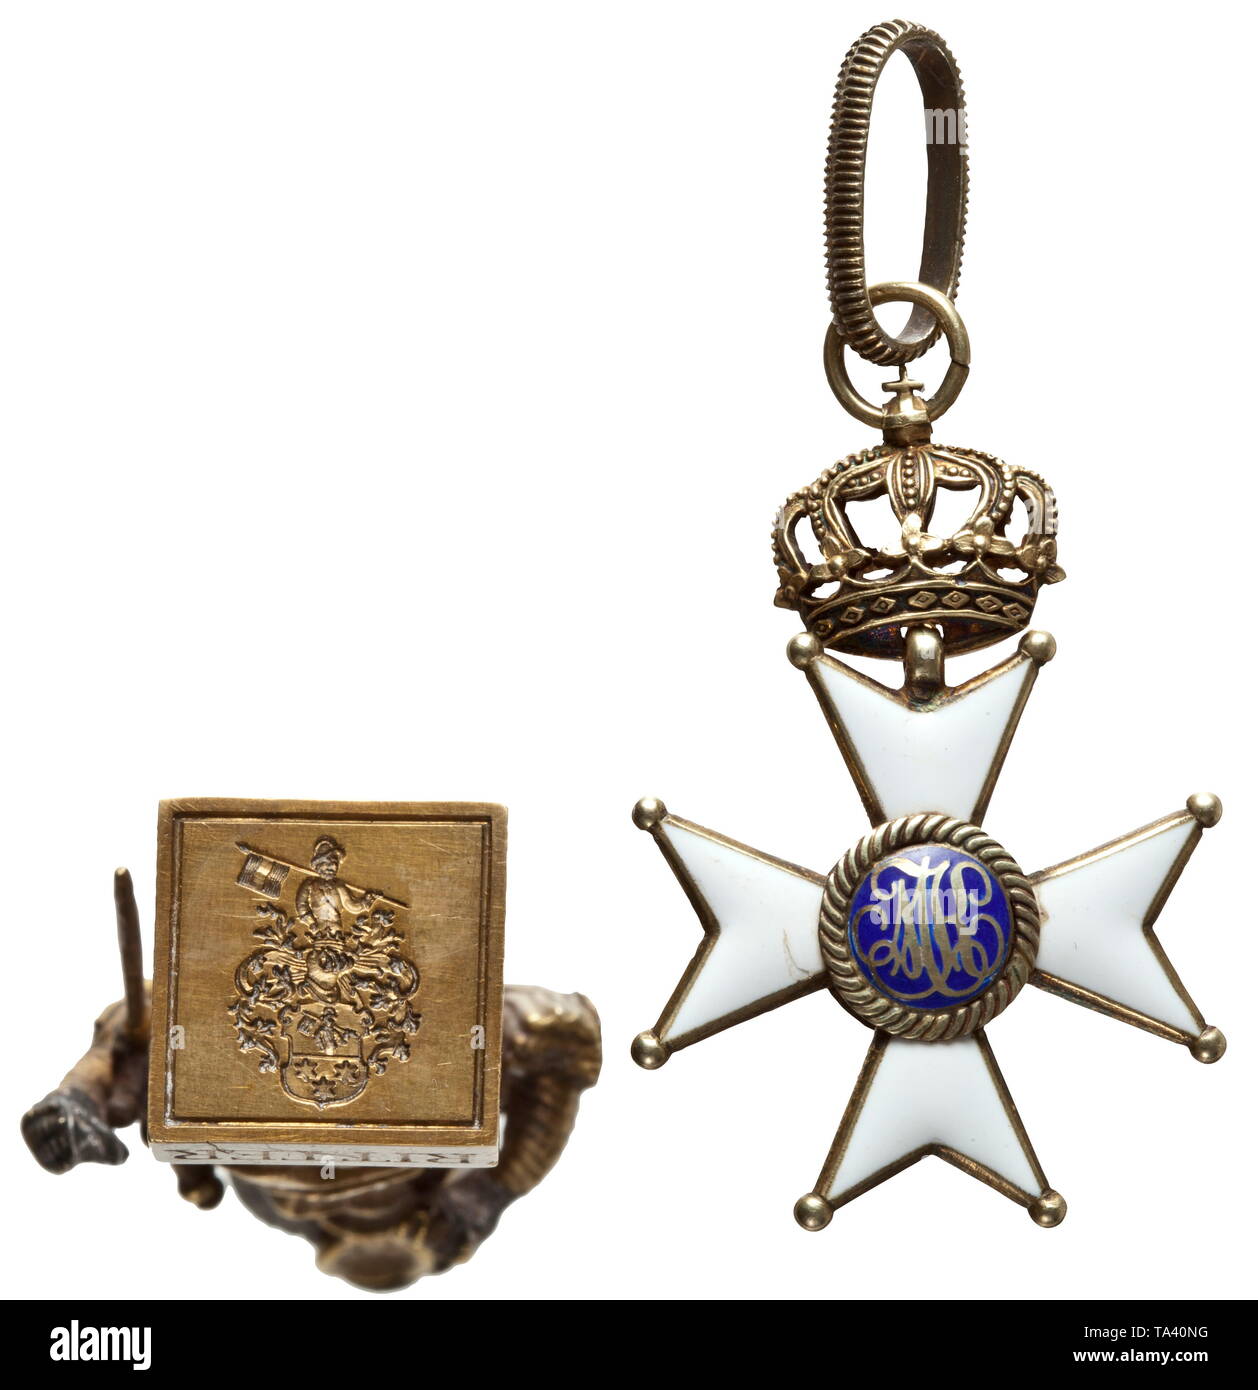 Maximilian Ritter von Pohl (1893 - 1951) - a seal, Military Order of Max Joseph, documents, insignia Seal in the shape of a standing bronze knight, an aristocratic coat of arms finely engraved on the seal surface, the rectangular base with engraved circumscription 'Max Ritter von Pohl', Height 83 mm. Military Order of Max Joseph, Knight's Cross, silver-plated gold, later second piece, presumably from the 1930s/40s, with ribbon section. Award document for the Bavarian Military Merit Order 4th Class with Crown and Swords, 3 July 1919, issued 22 August 1919. Furthermore, numer, Editorial-Use-Only Stock Photo